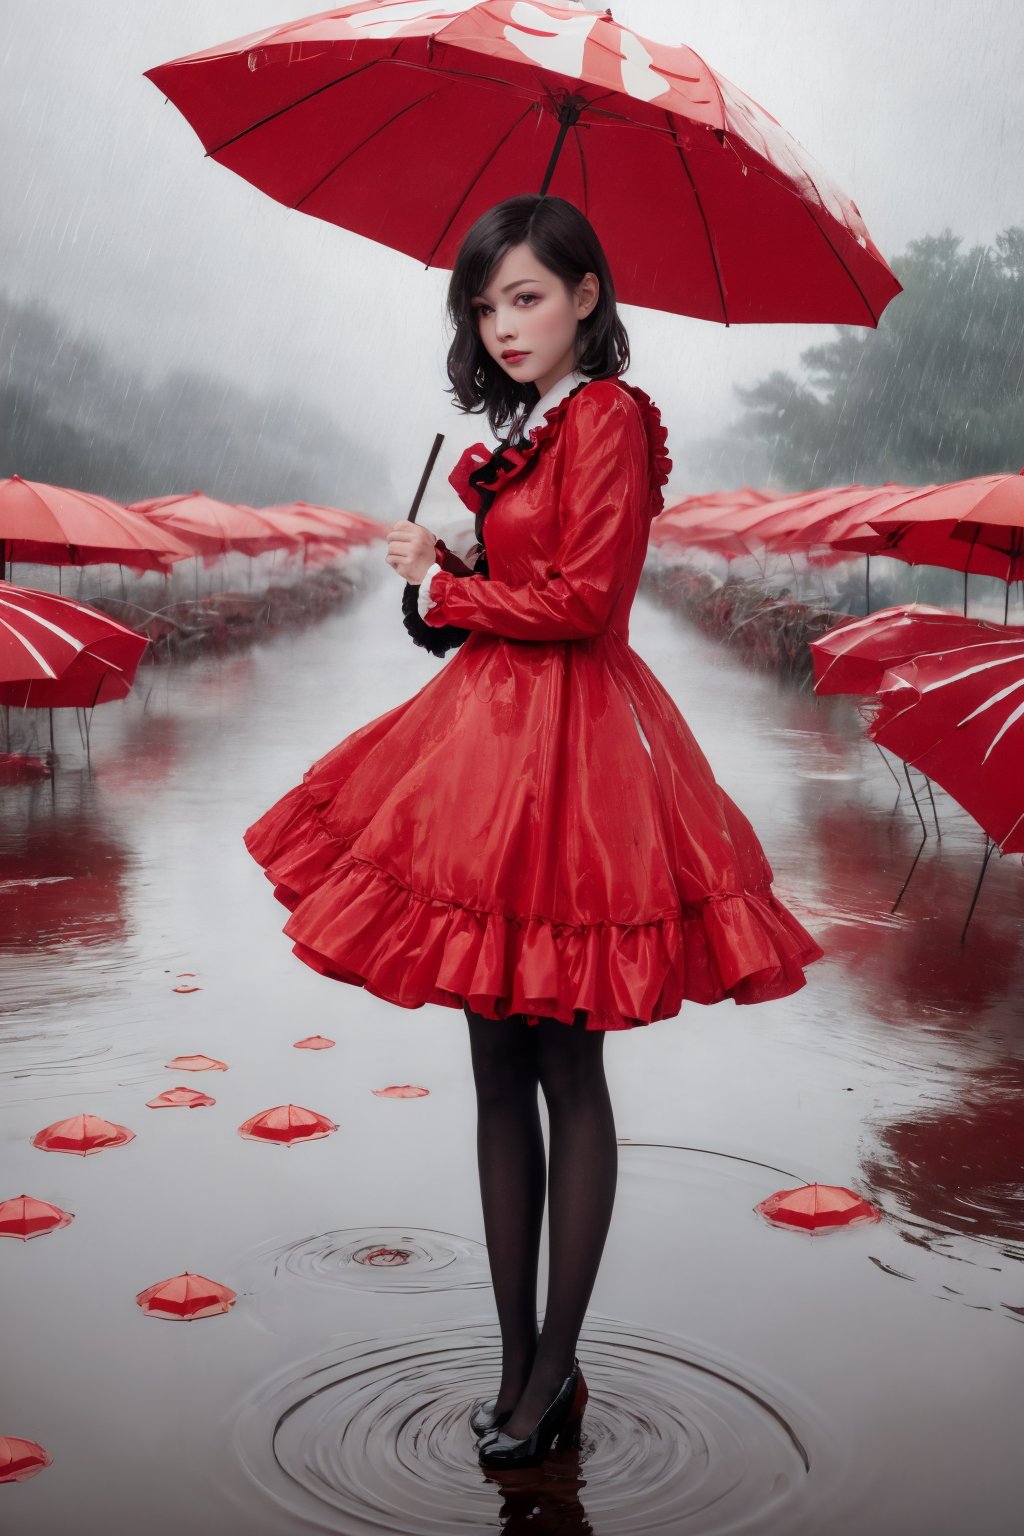 Create an image of a mysterious character in a ruffled red dress with white and black striped stockings standing under an oversized red umbrella amidst heavy rainfall. The setting is somber with various shades of grey, punctuated by multiple smaller red umbrellas scattered around. Raindrops create ripples on puddles on the ground, adding to the atmospheric depth of the scene.